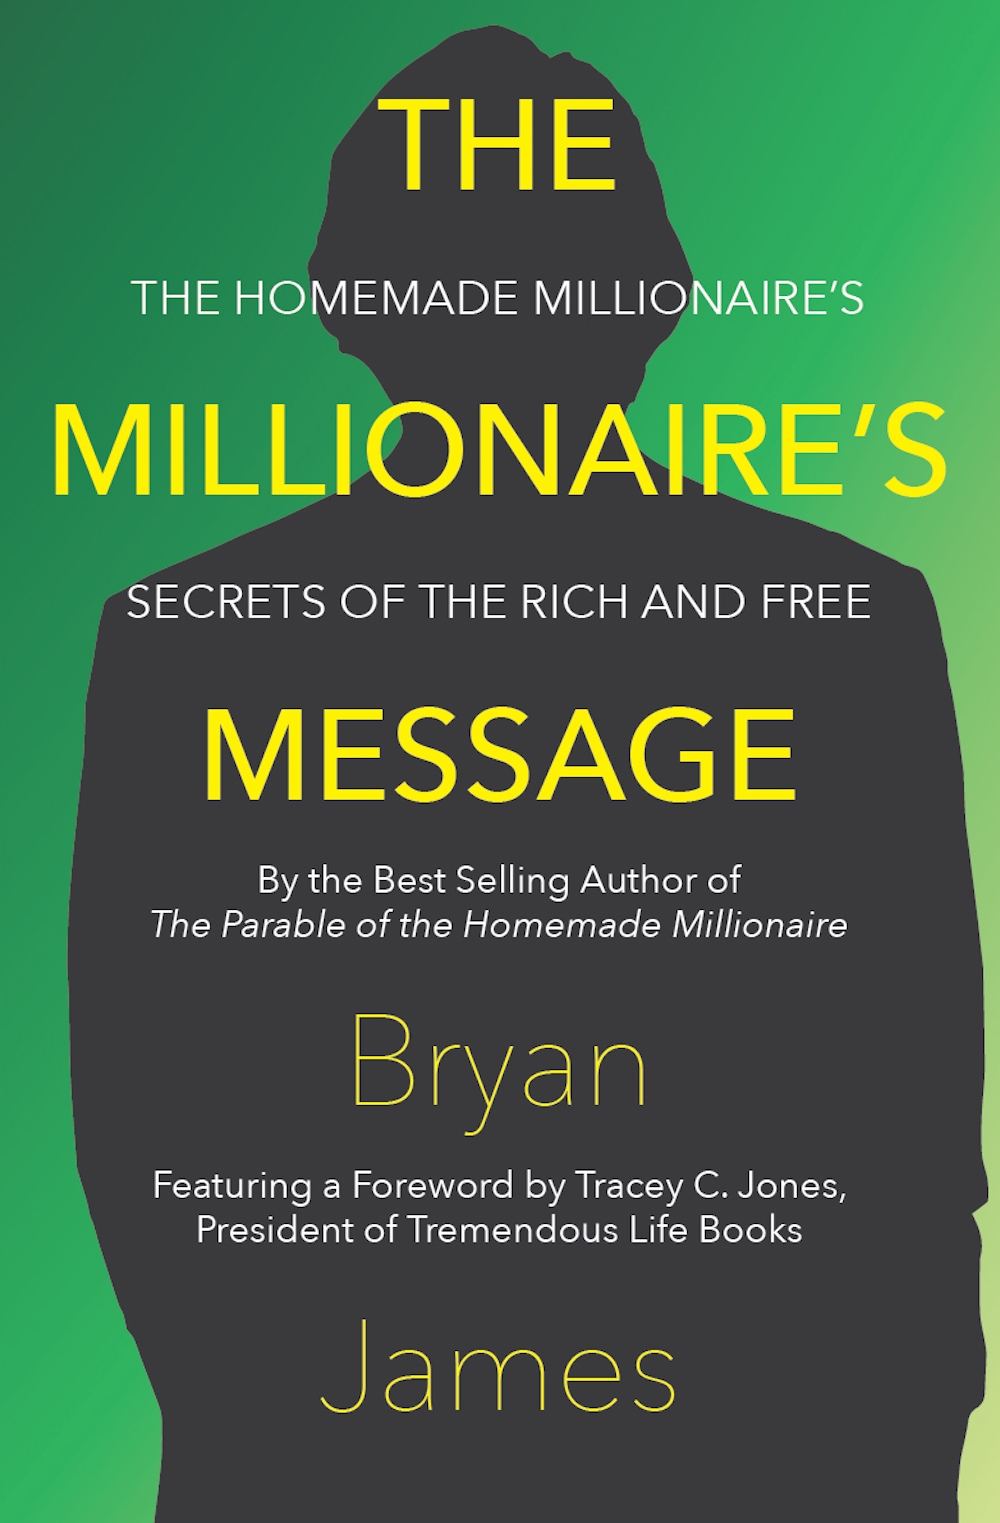 Midwest Book Review: ‘Millionaire’s Message’ is “highly recommended”